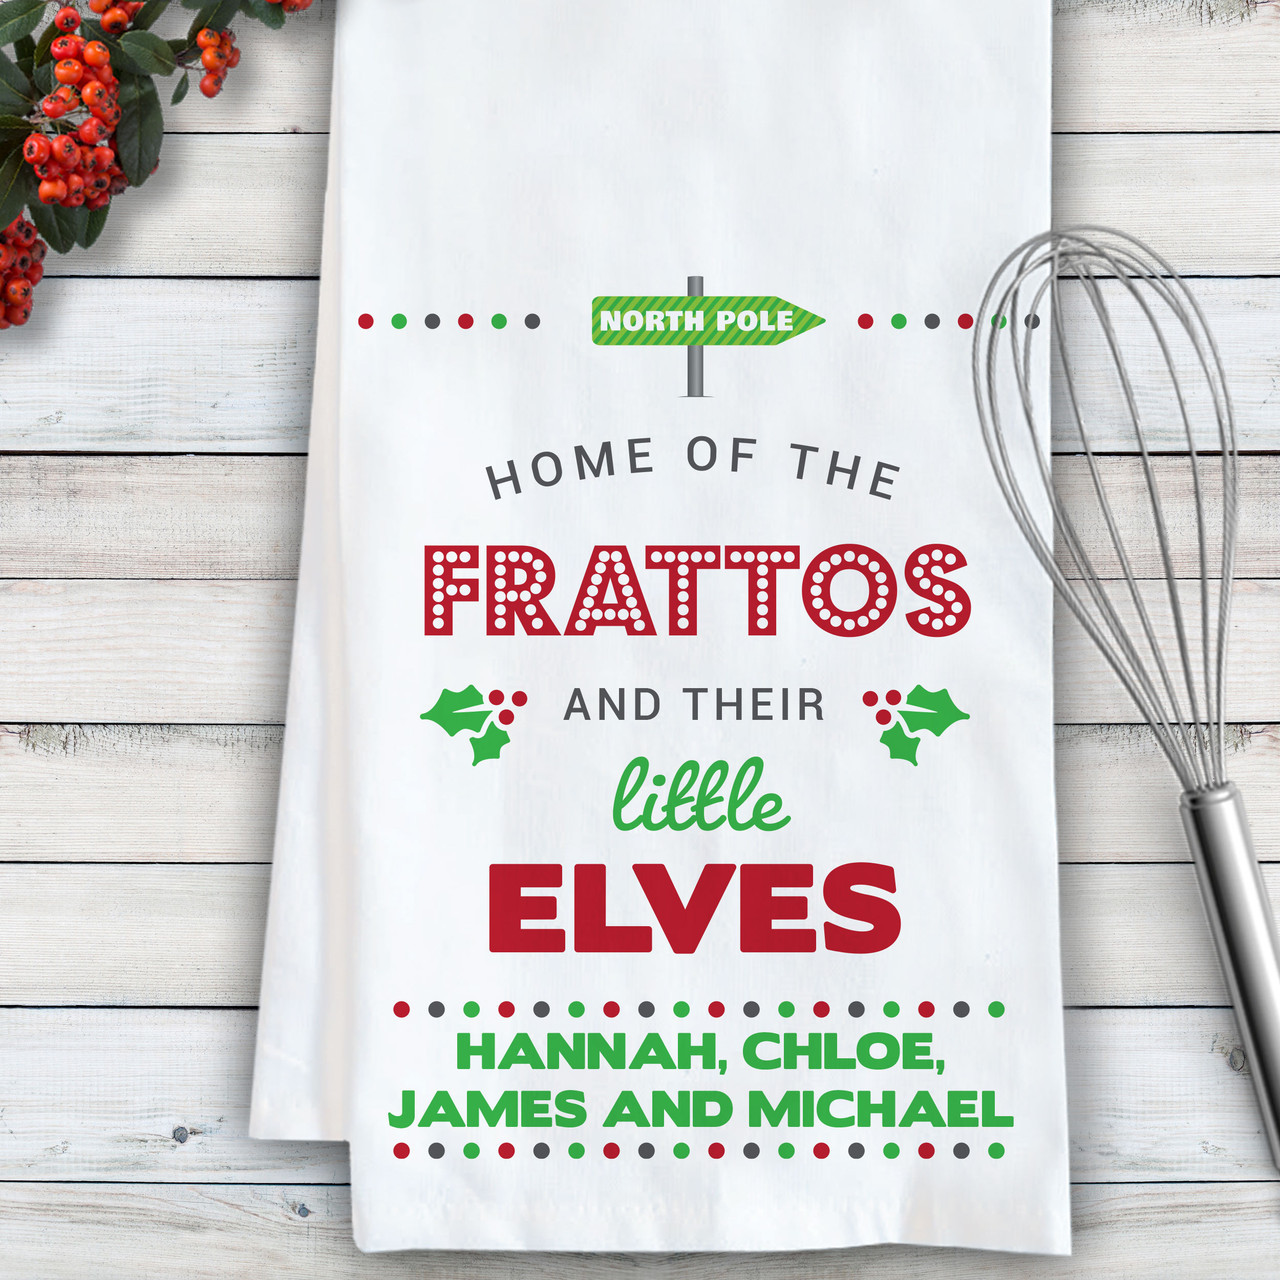 https://cdn11.bigcommerce.com/s-5grzuu6/images/stencil/1280x1280/products/2484/50770/Little-Elves-Christmas_Personalized-Holiday-Kitchen-Towel__04397.1666734819.1280.1280__82763.1666734864.jpg?c=2